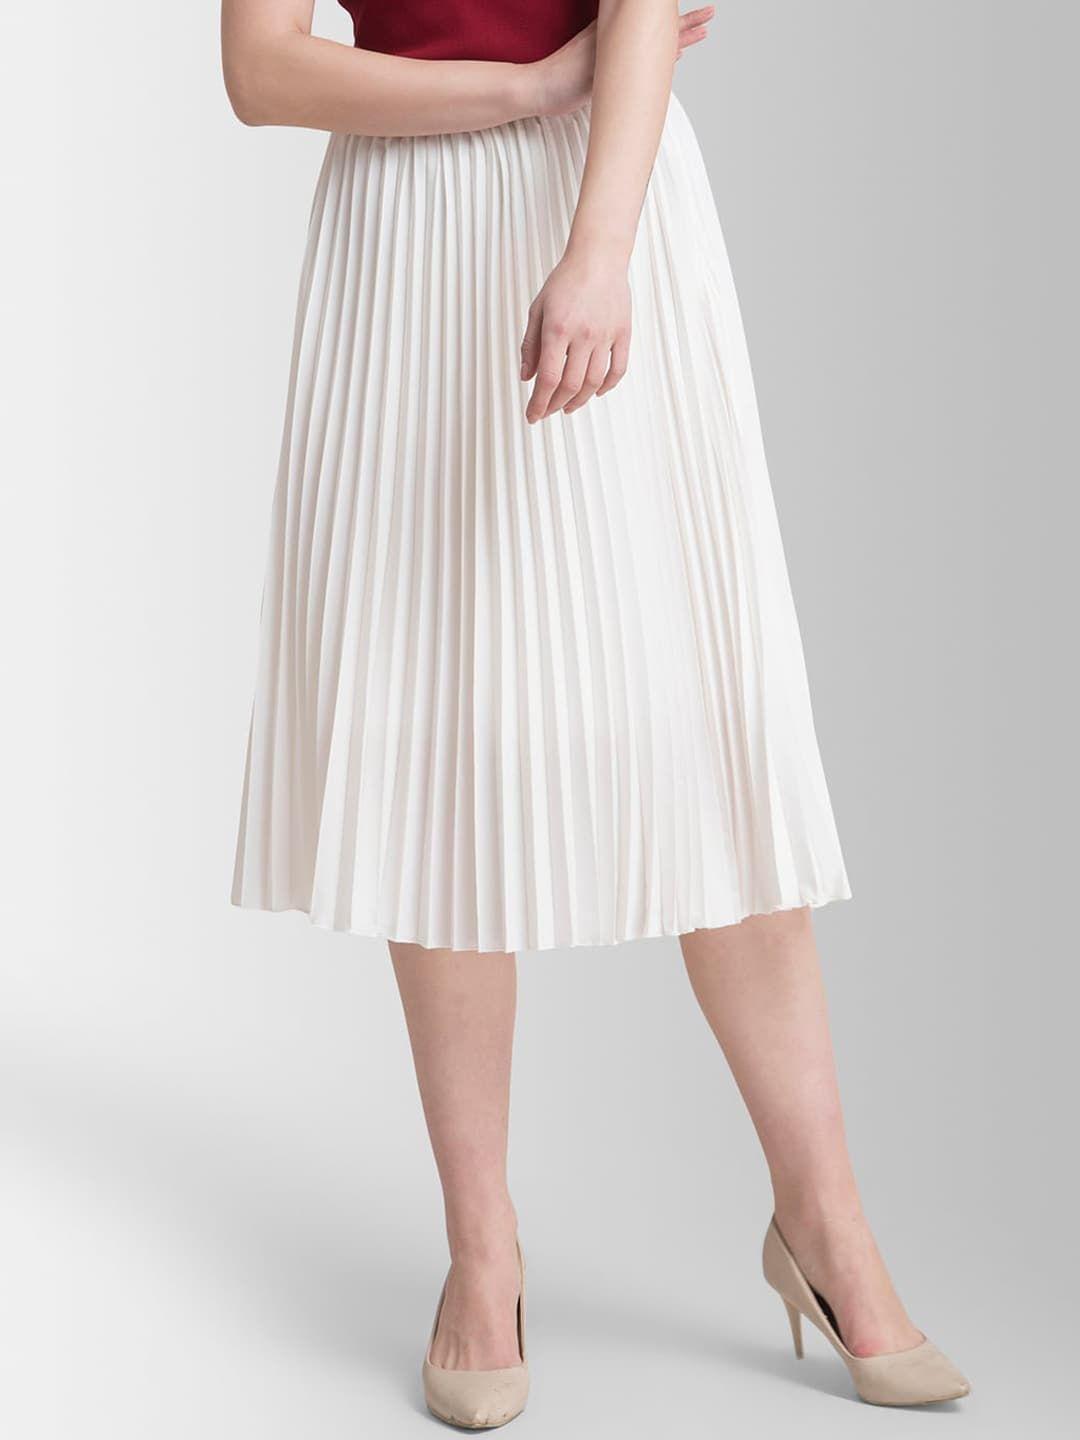 fablestreet white accordion pleated a-line midi skirt